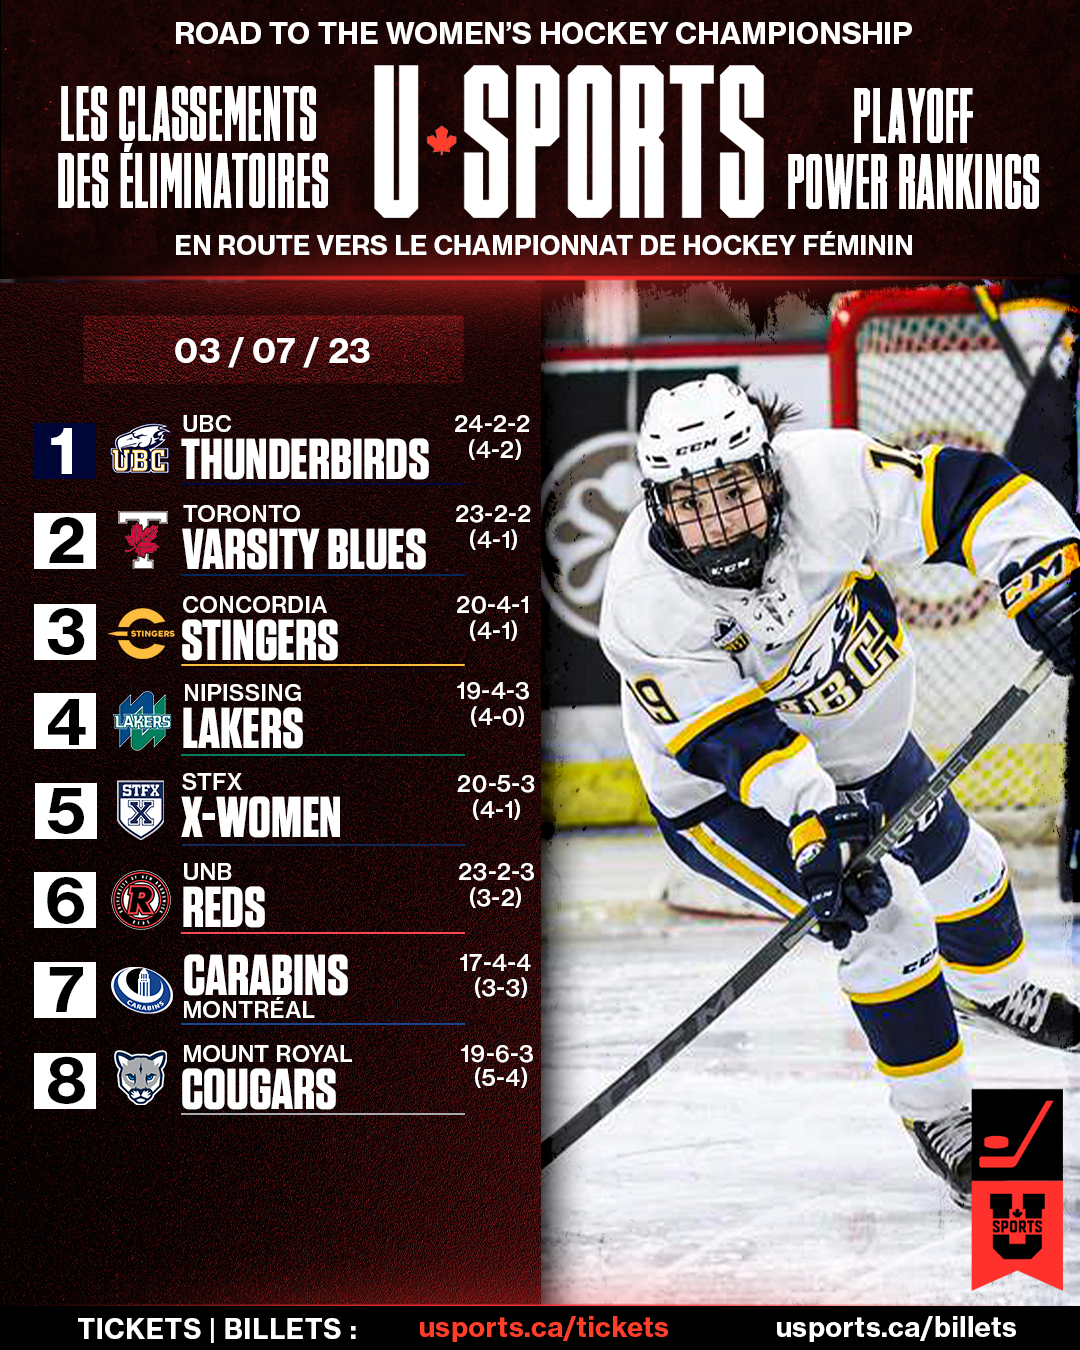 whky_embedded_march_7_2023_v2.png (2.27 MB)